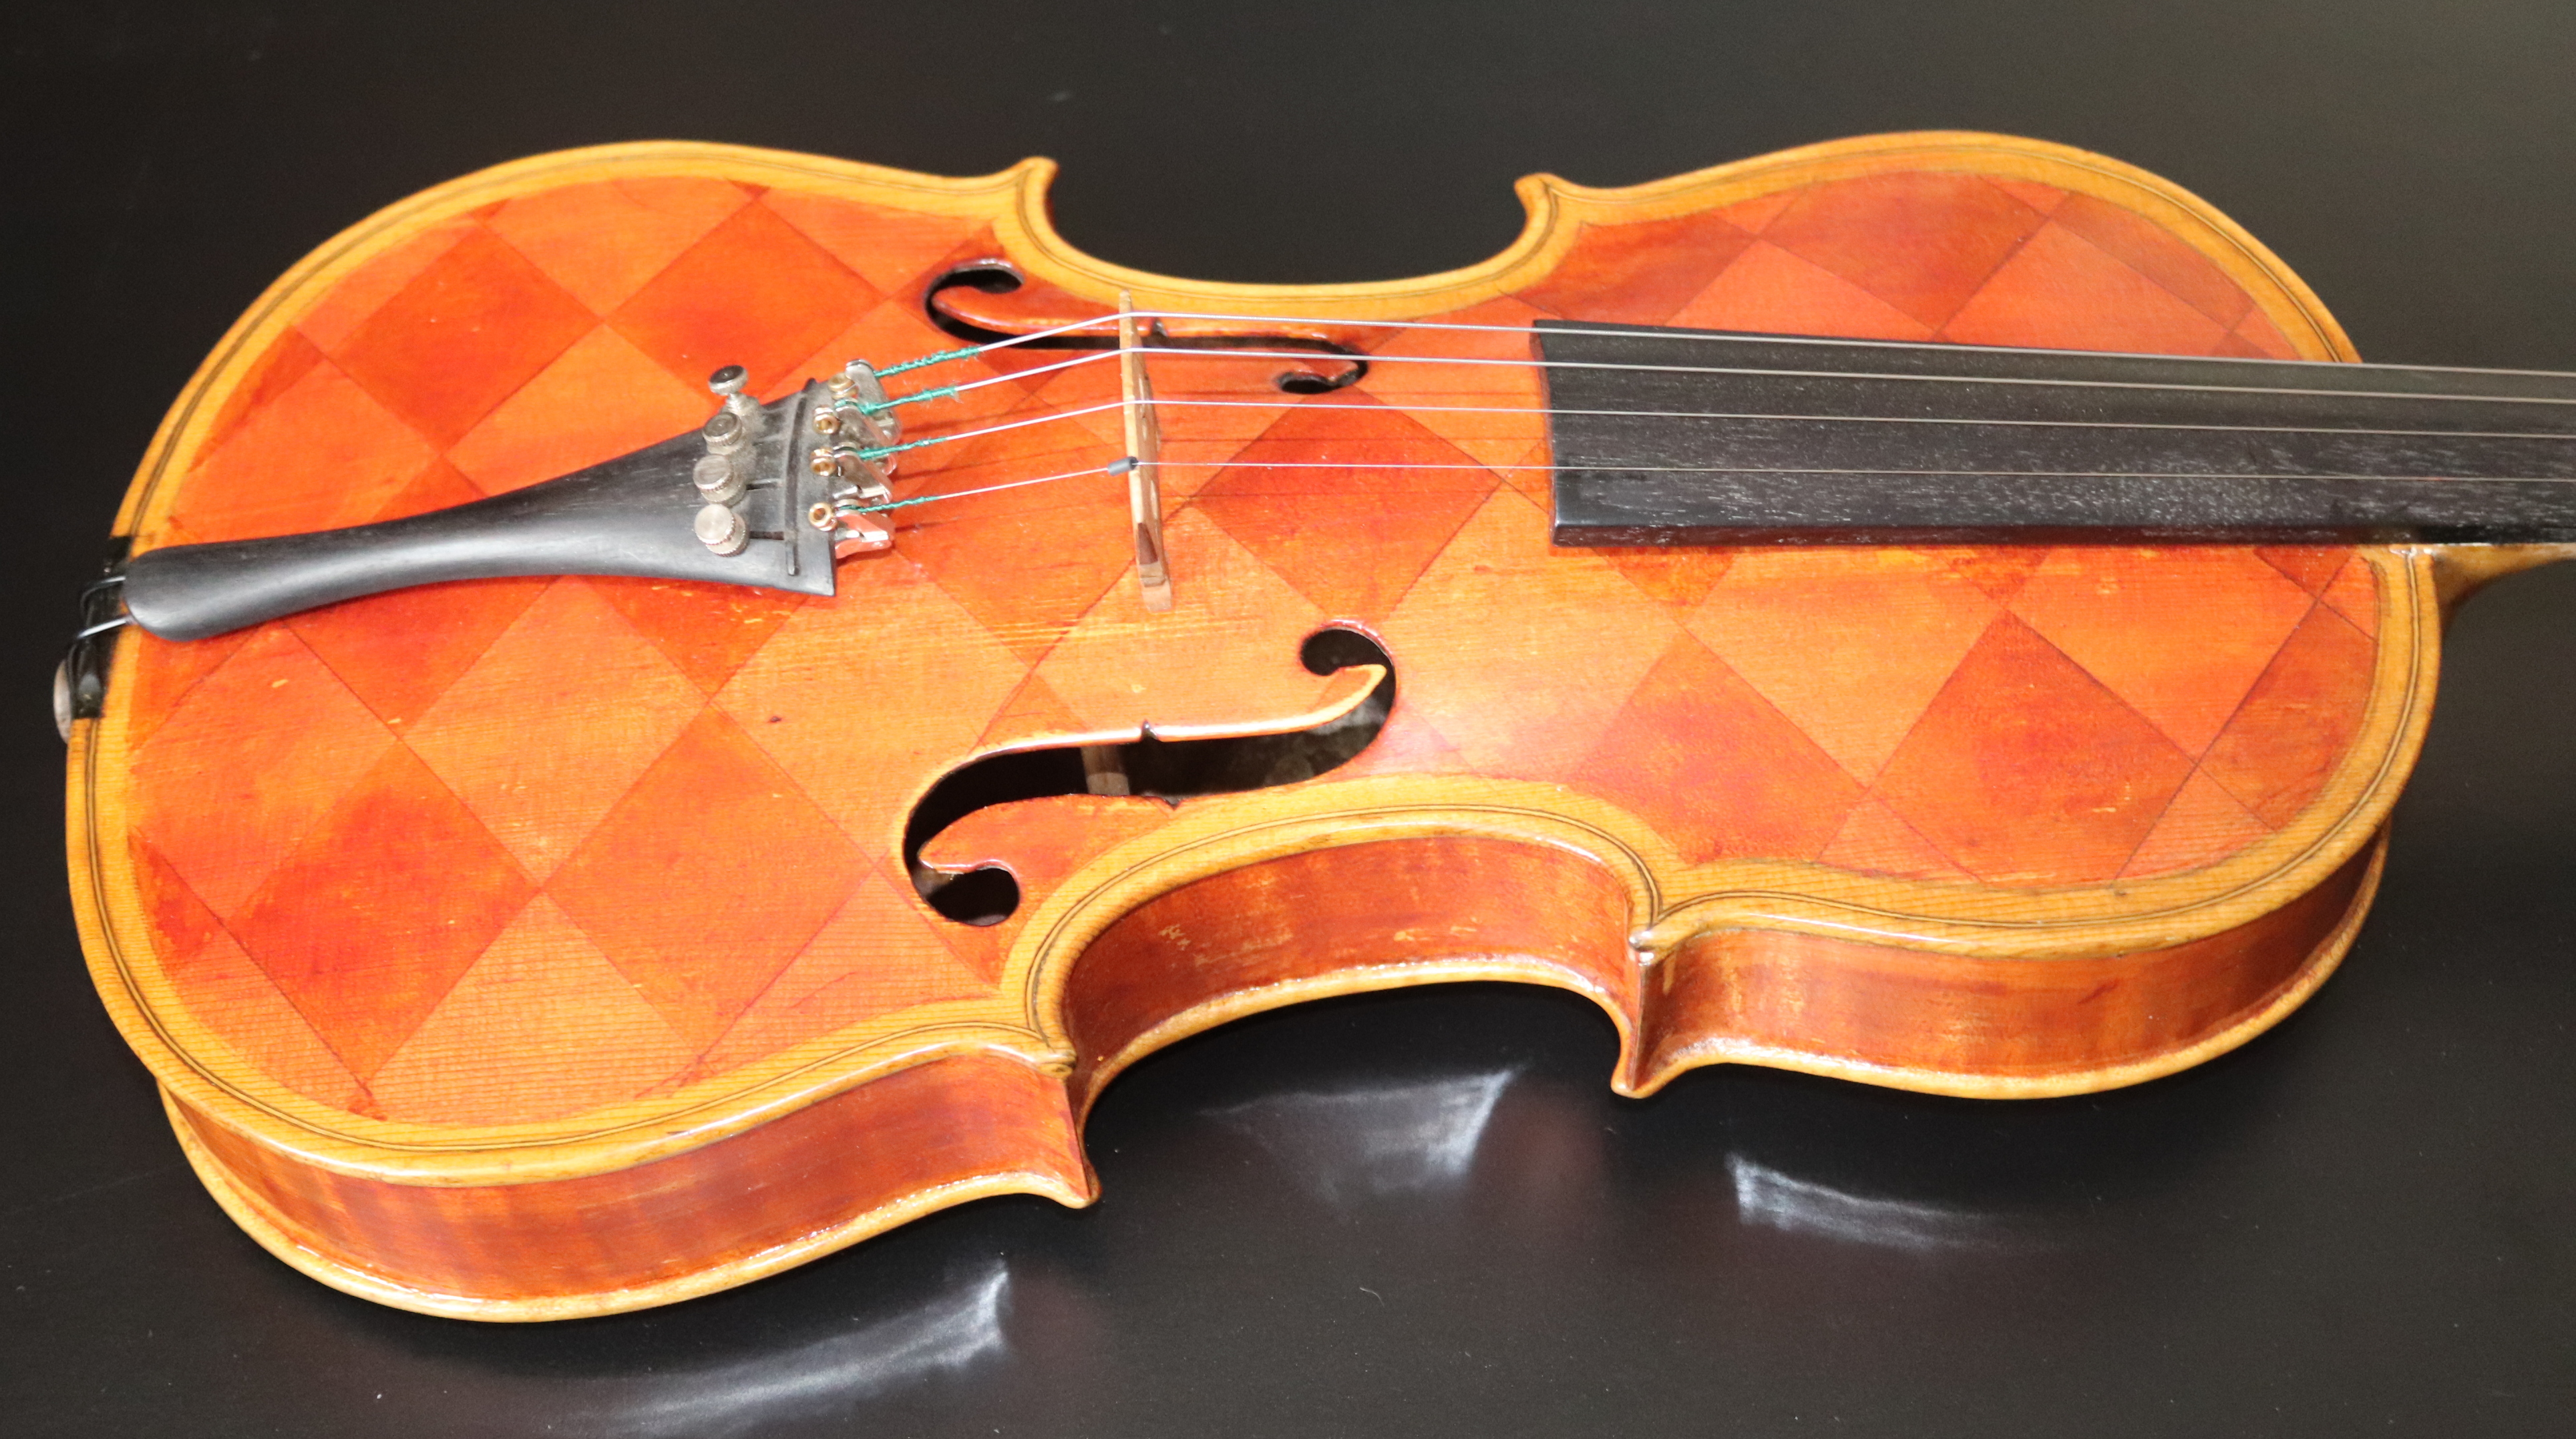 Decorative Violin With Diamond Decorated Body, Two Piece Back With Split To Edge, Overall Length 23. - Image 2 of 6